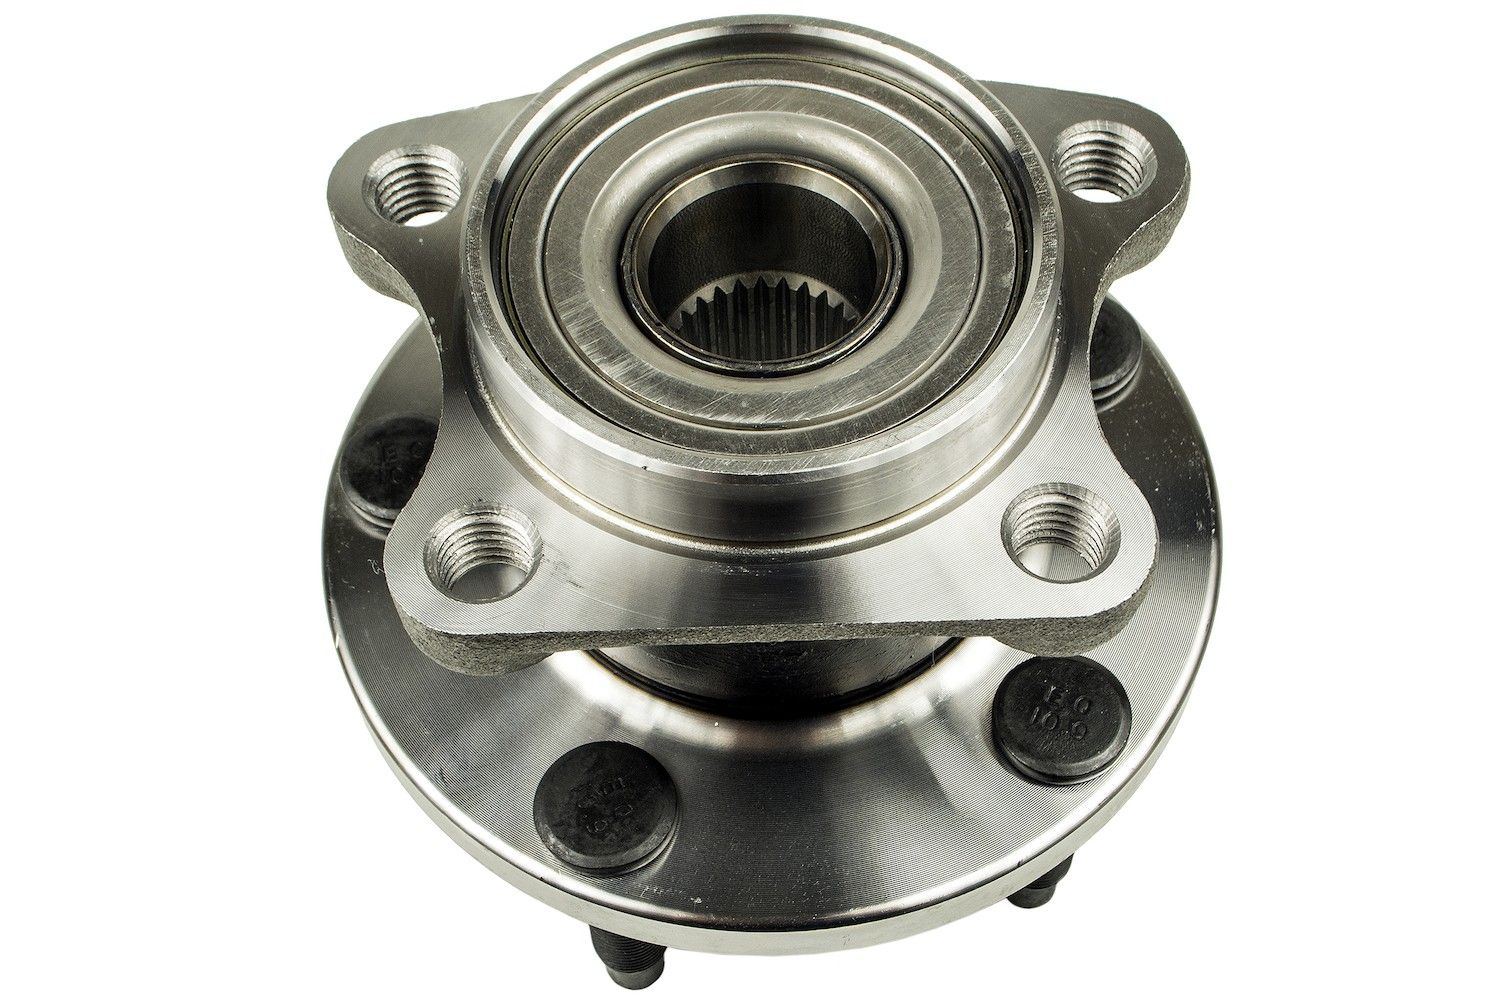 Ford Edge Wheel Bearing and Hub Assembly Replacement (Centric, FAG 2009 Ford Edge Lug Nut Torque